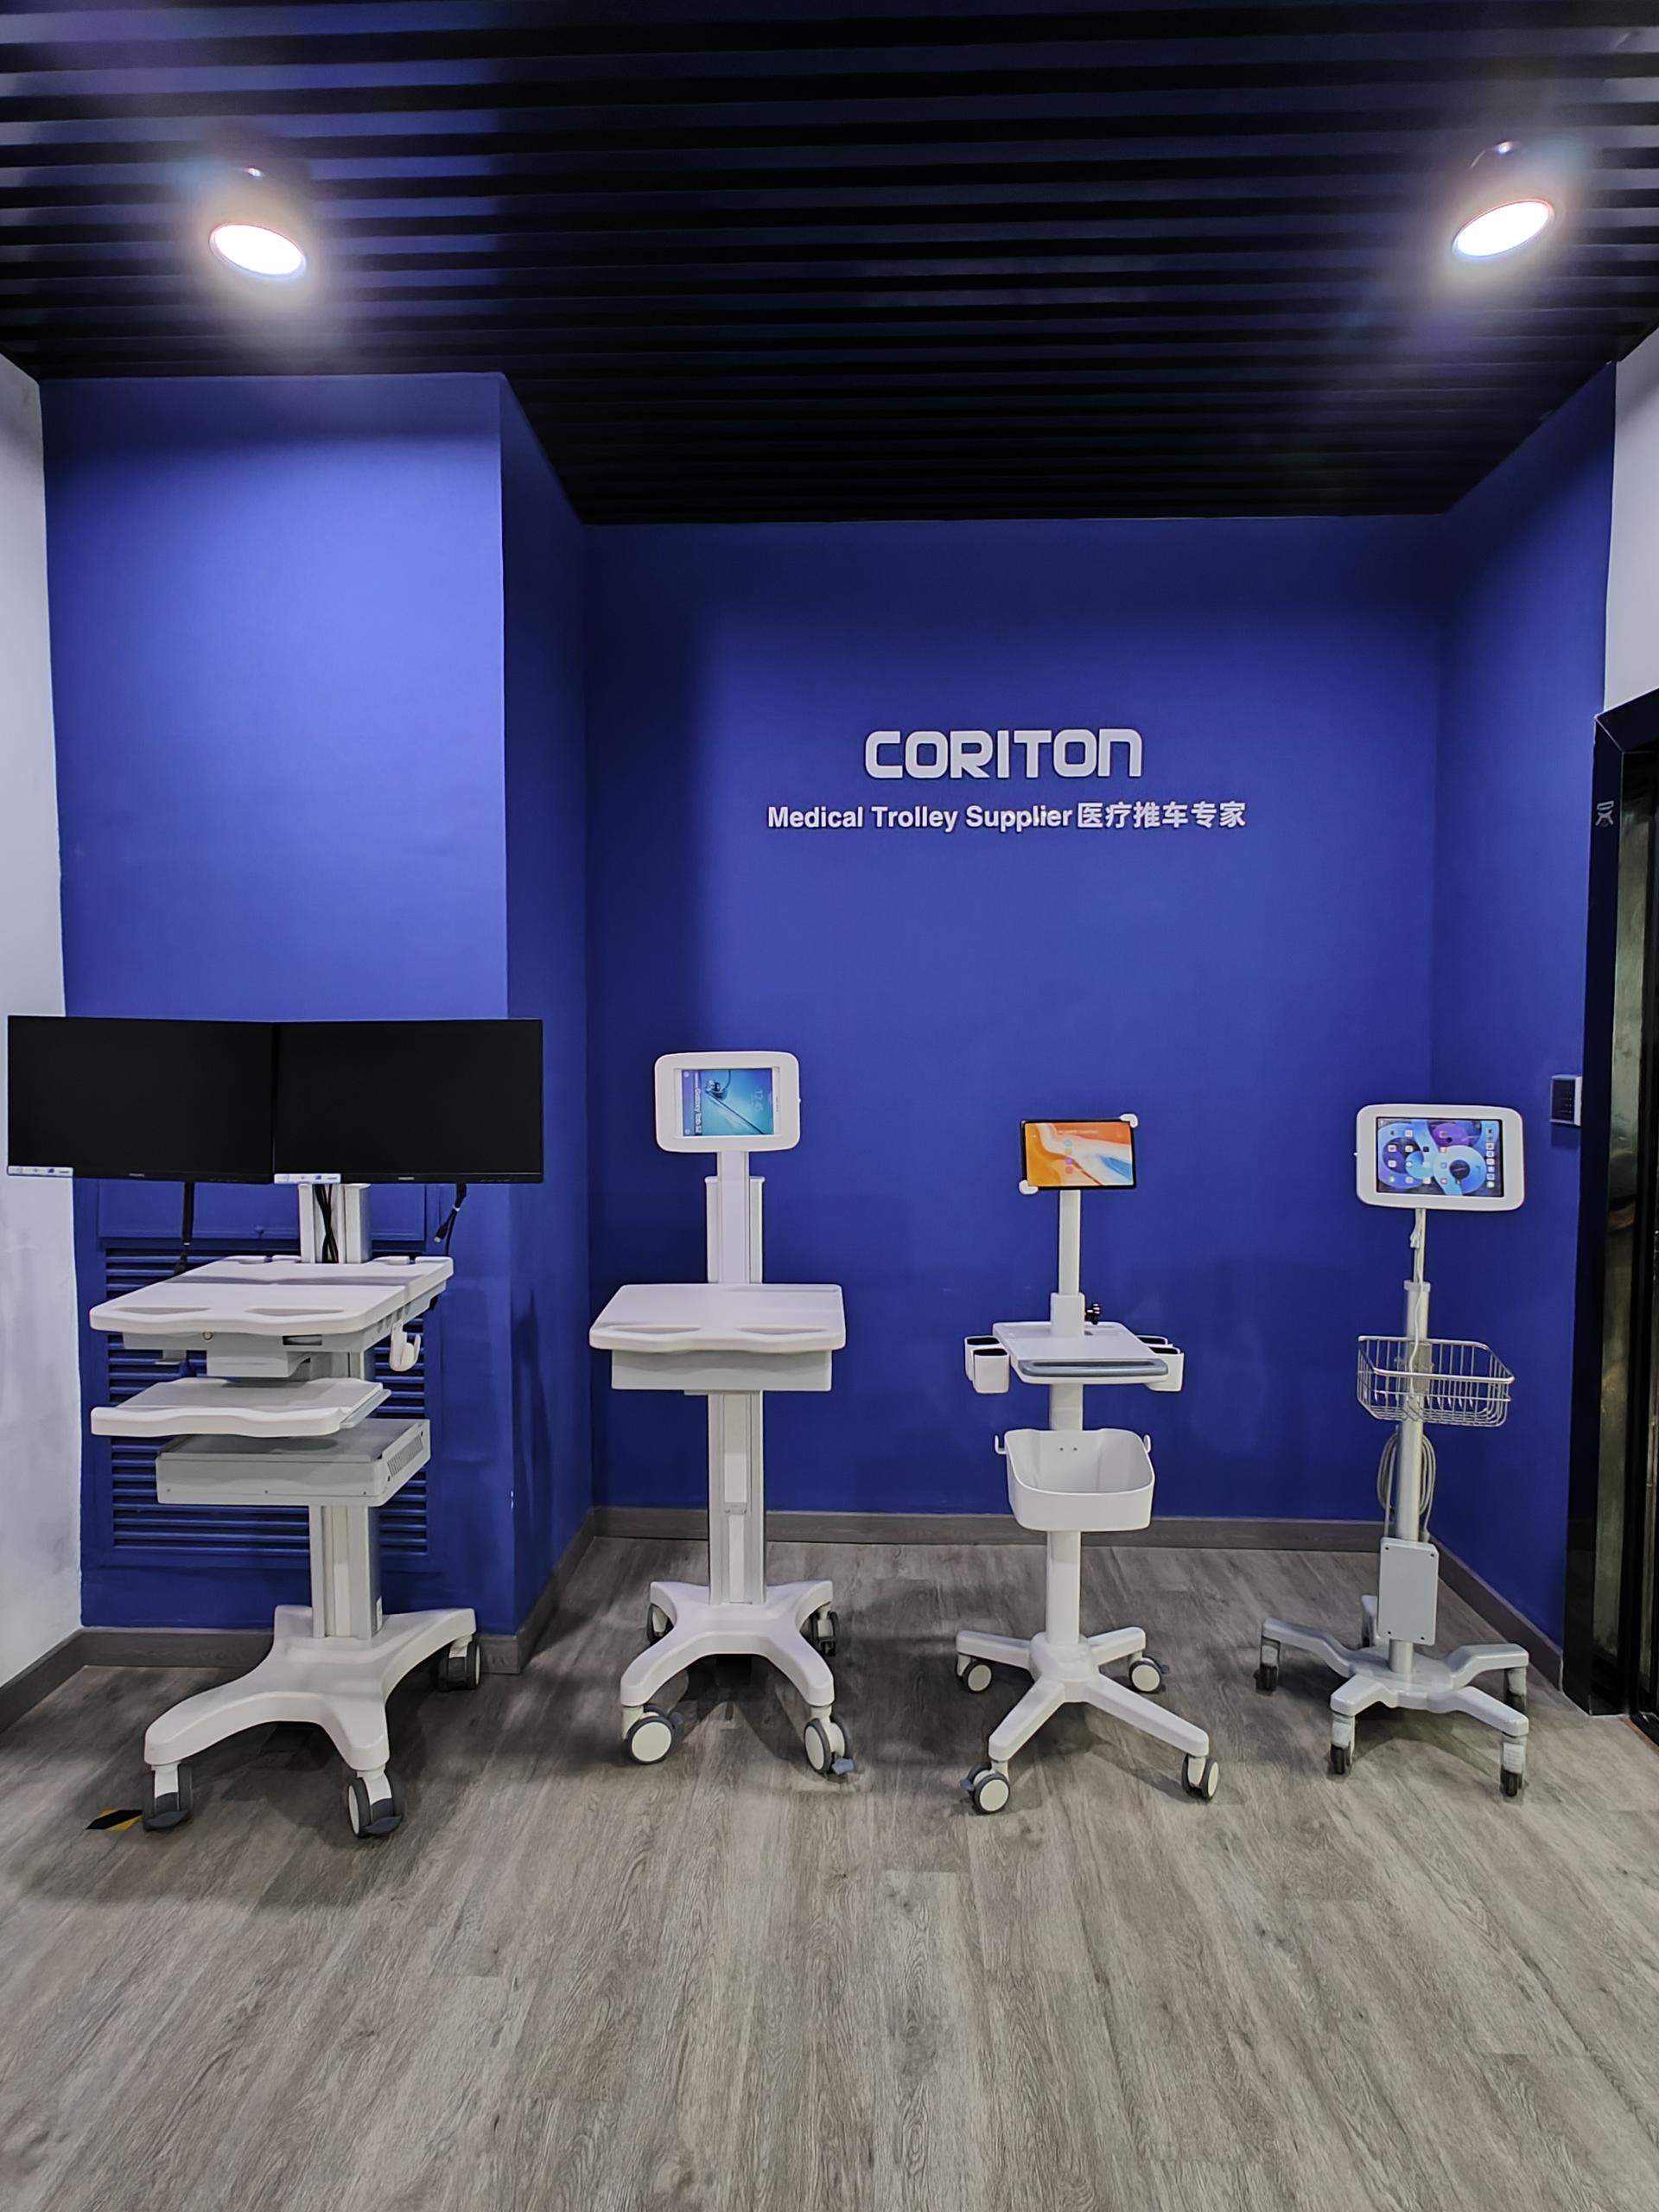 Shenzhen CMEF CORITON a variety of medical equipment mobile solutions were unveiled